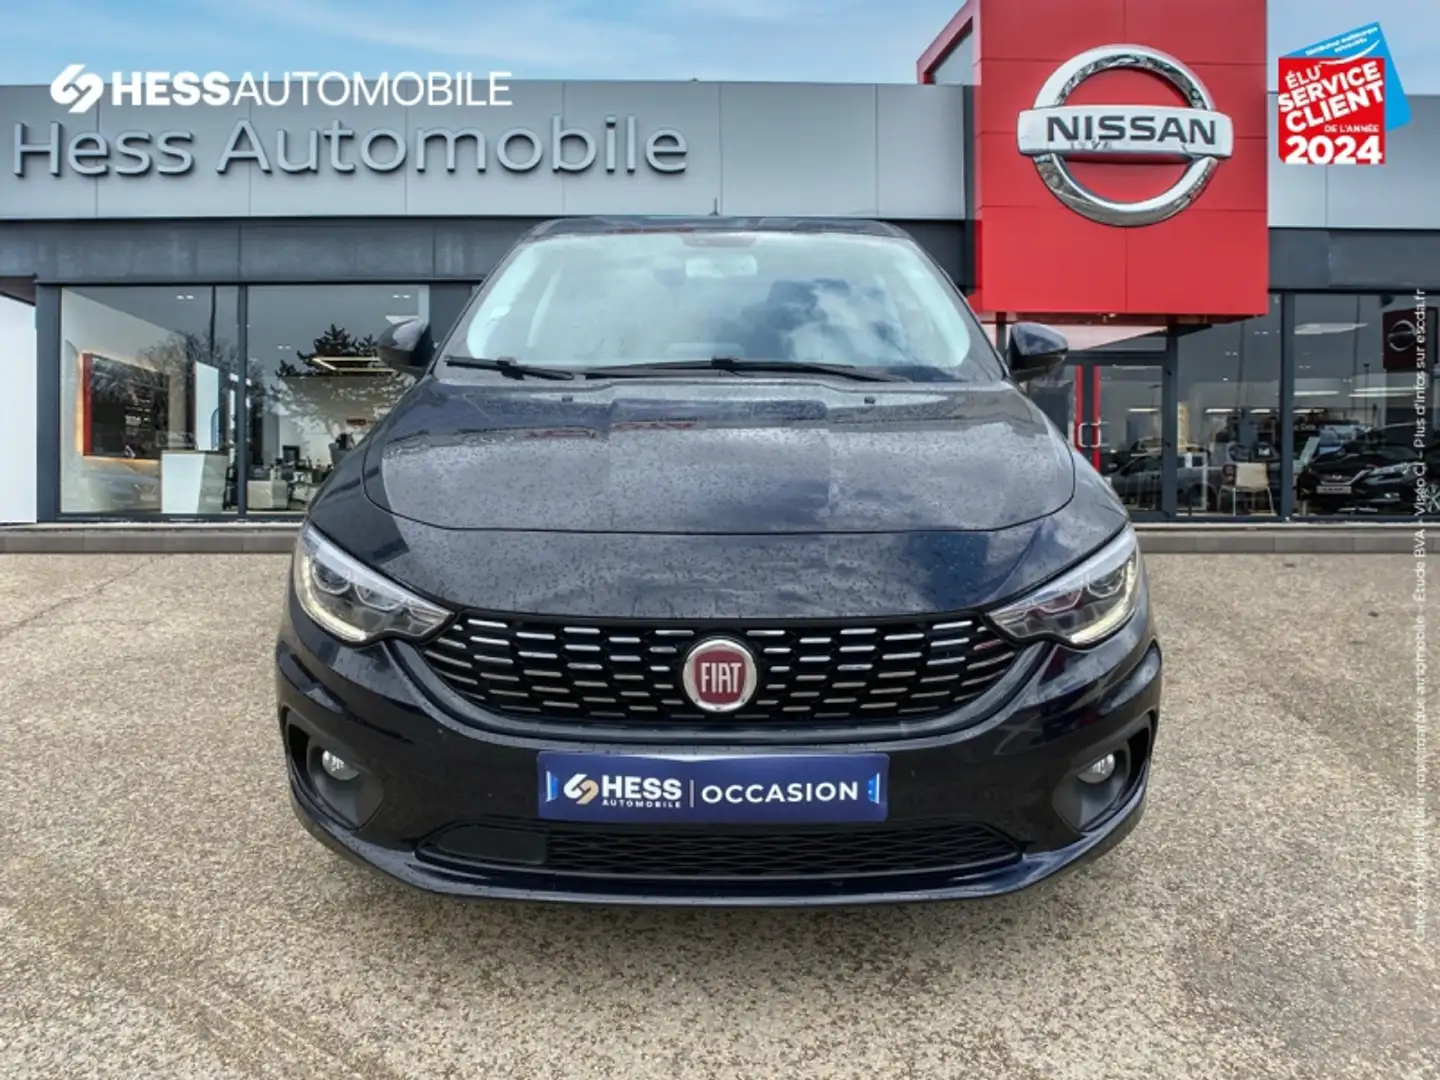 Fiat Tipo 1.6 MultiJet 120ch Lounge S/S MY19 110g 5p - 2